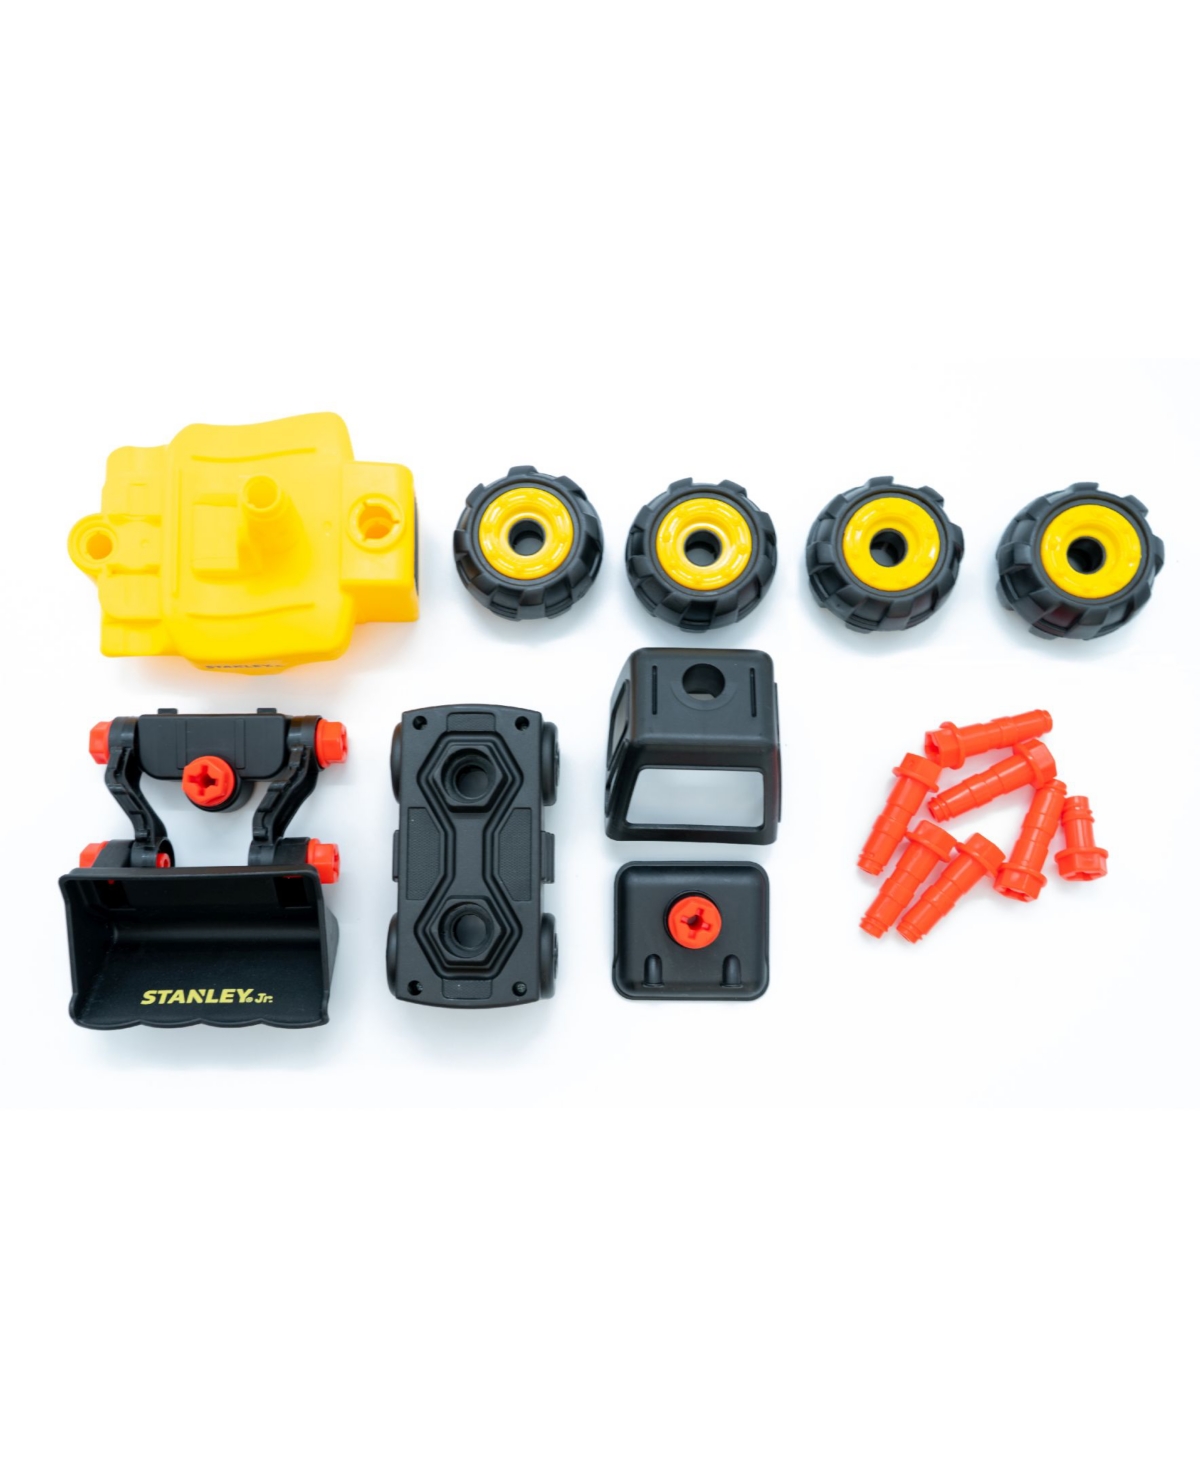 Stanley Jr. 16 Piece Take Apart Classic Front Loader In Black,yellow